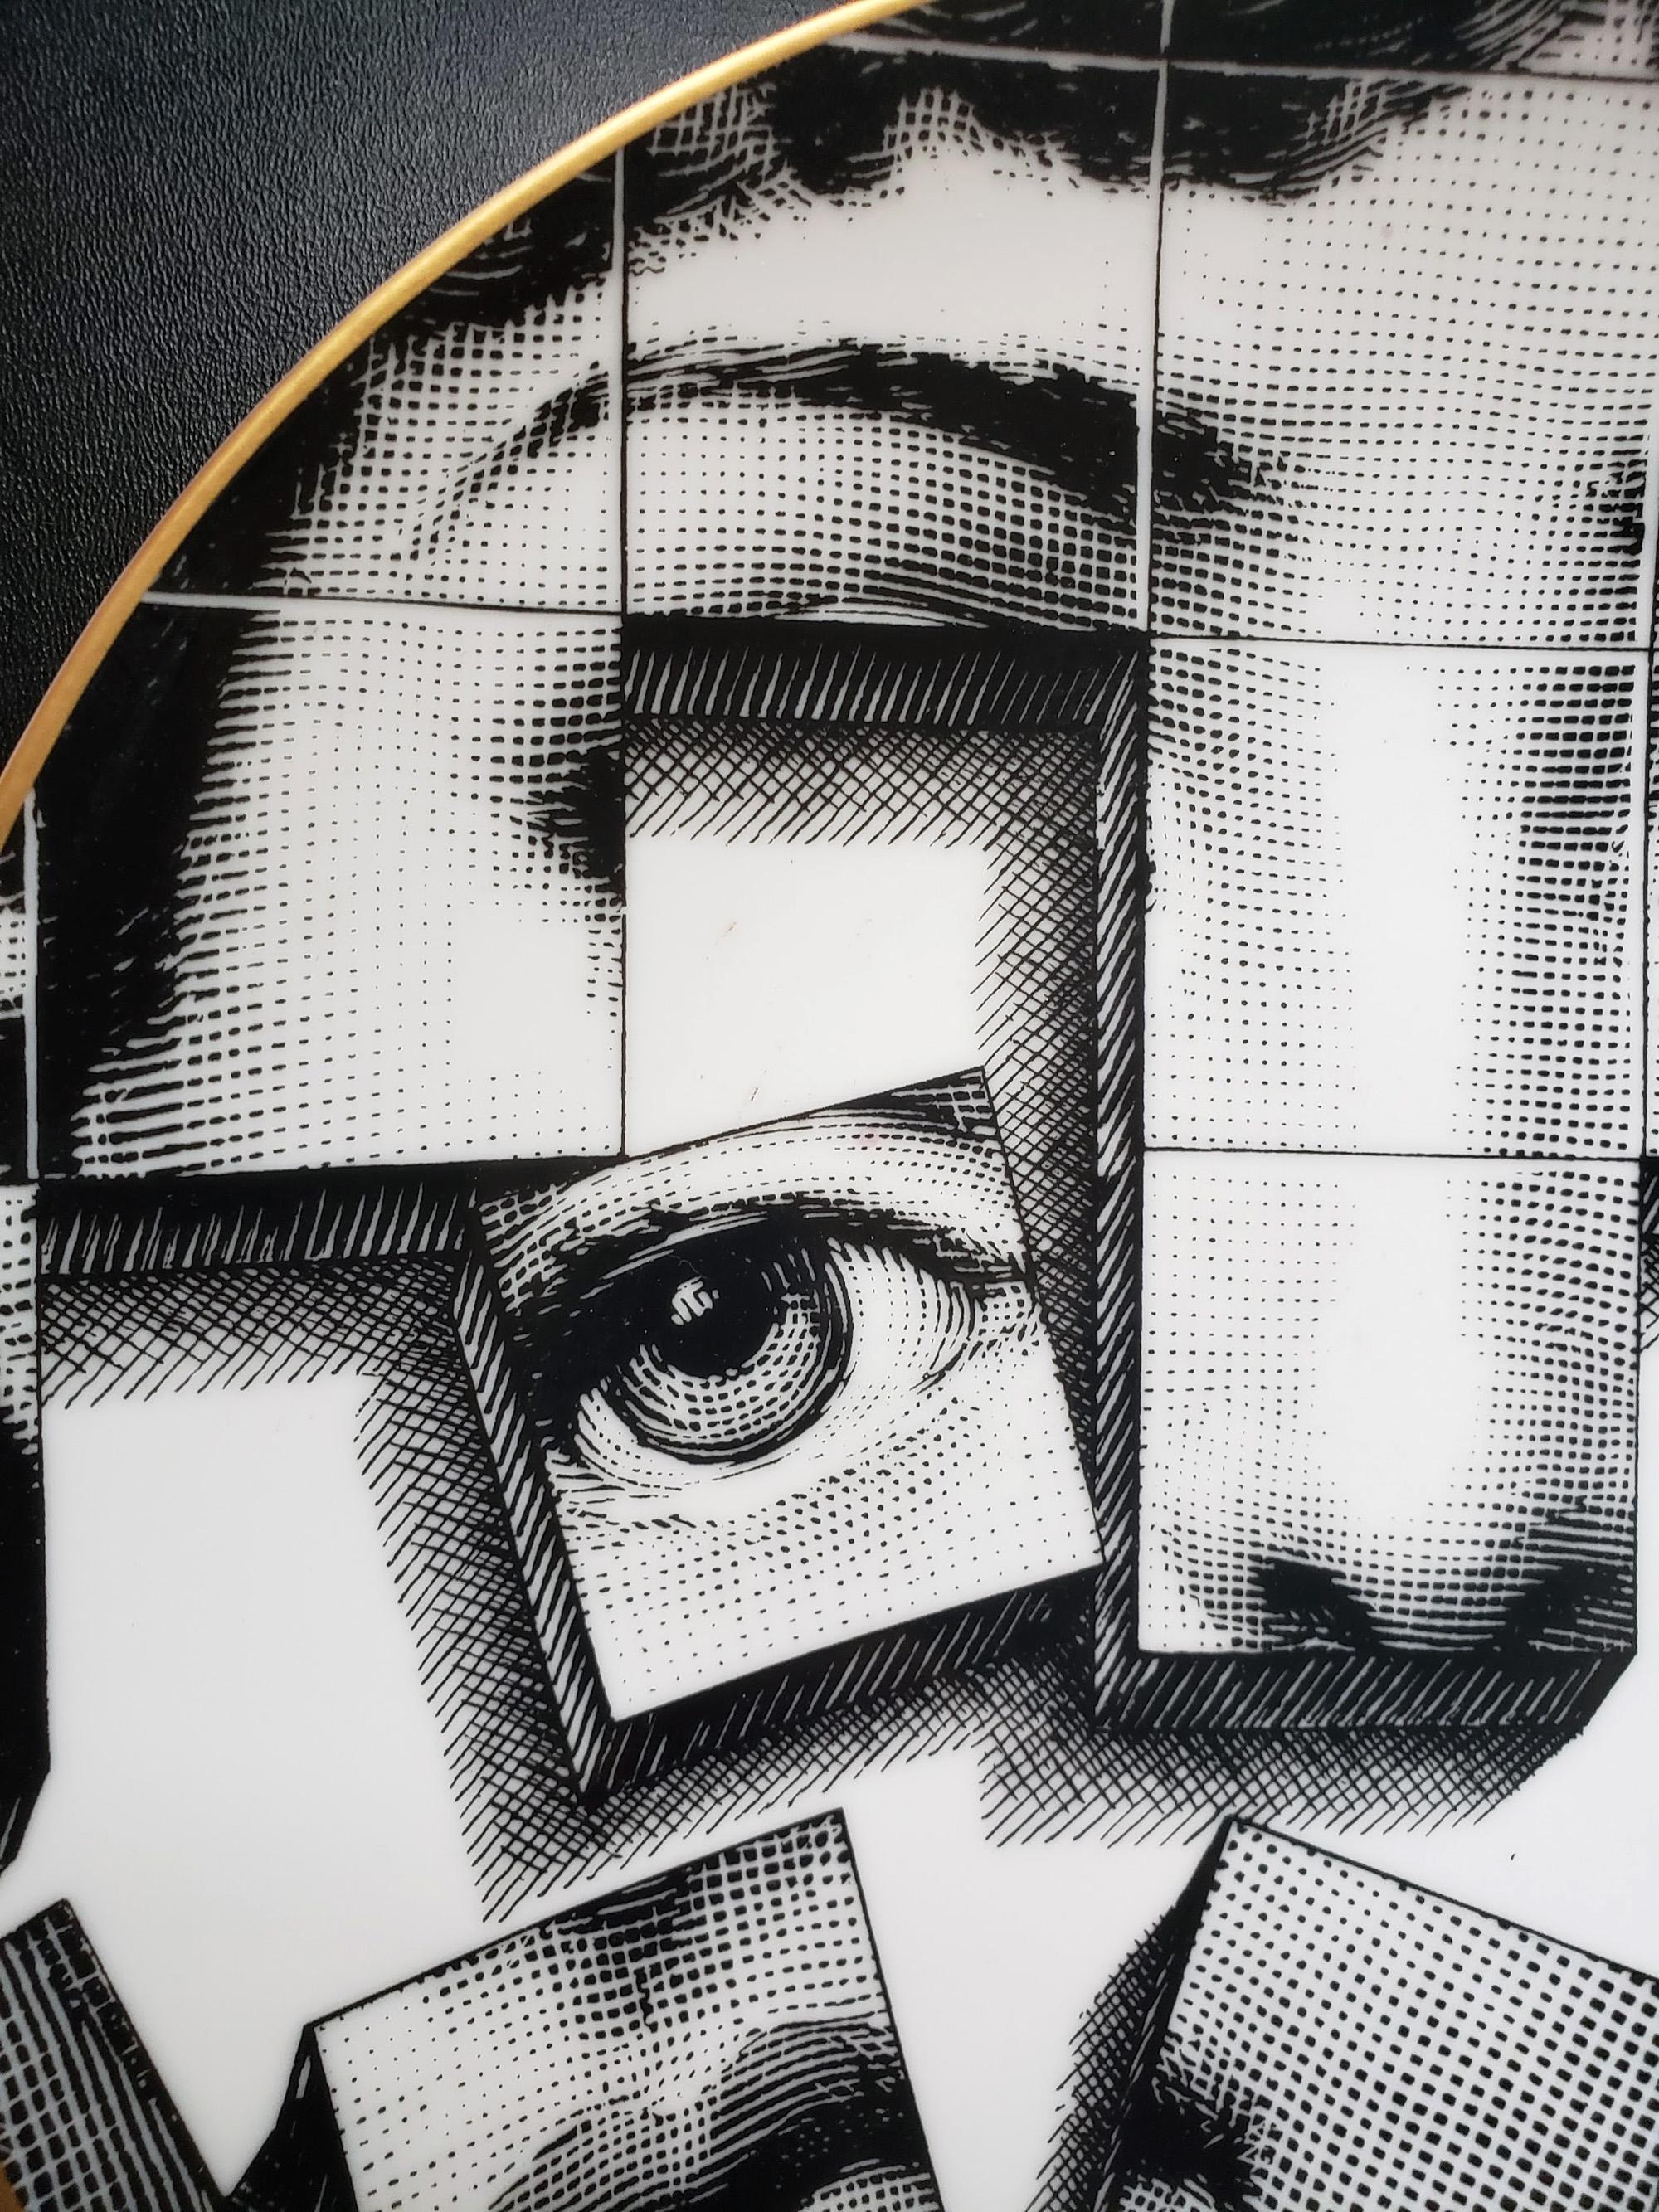 Piero Fornasetti cubist rosenthal plate,
Motiv 33, 
Themes & variation

The unusual Cubist vision of Lina Cavatelli is number Motiv 33 and depicts the famous face of the opera singer Lina with a disintergrating grid of her face.

Dimension: 9